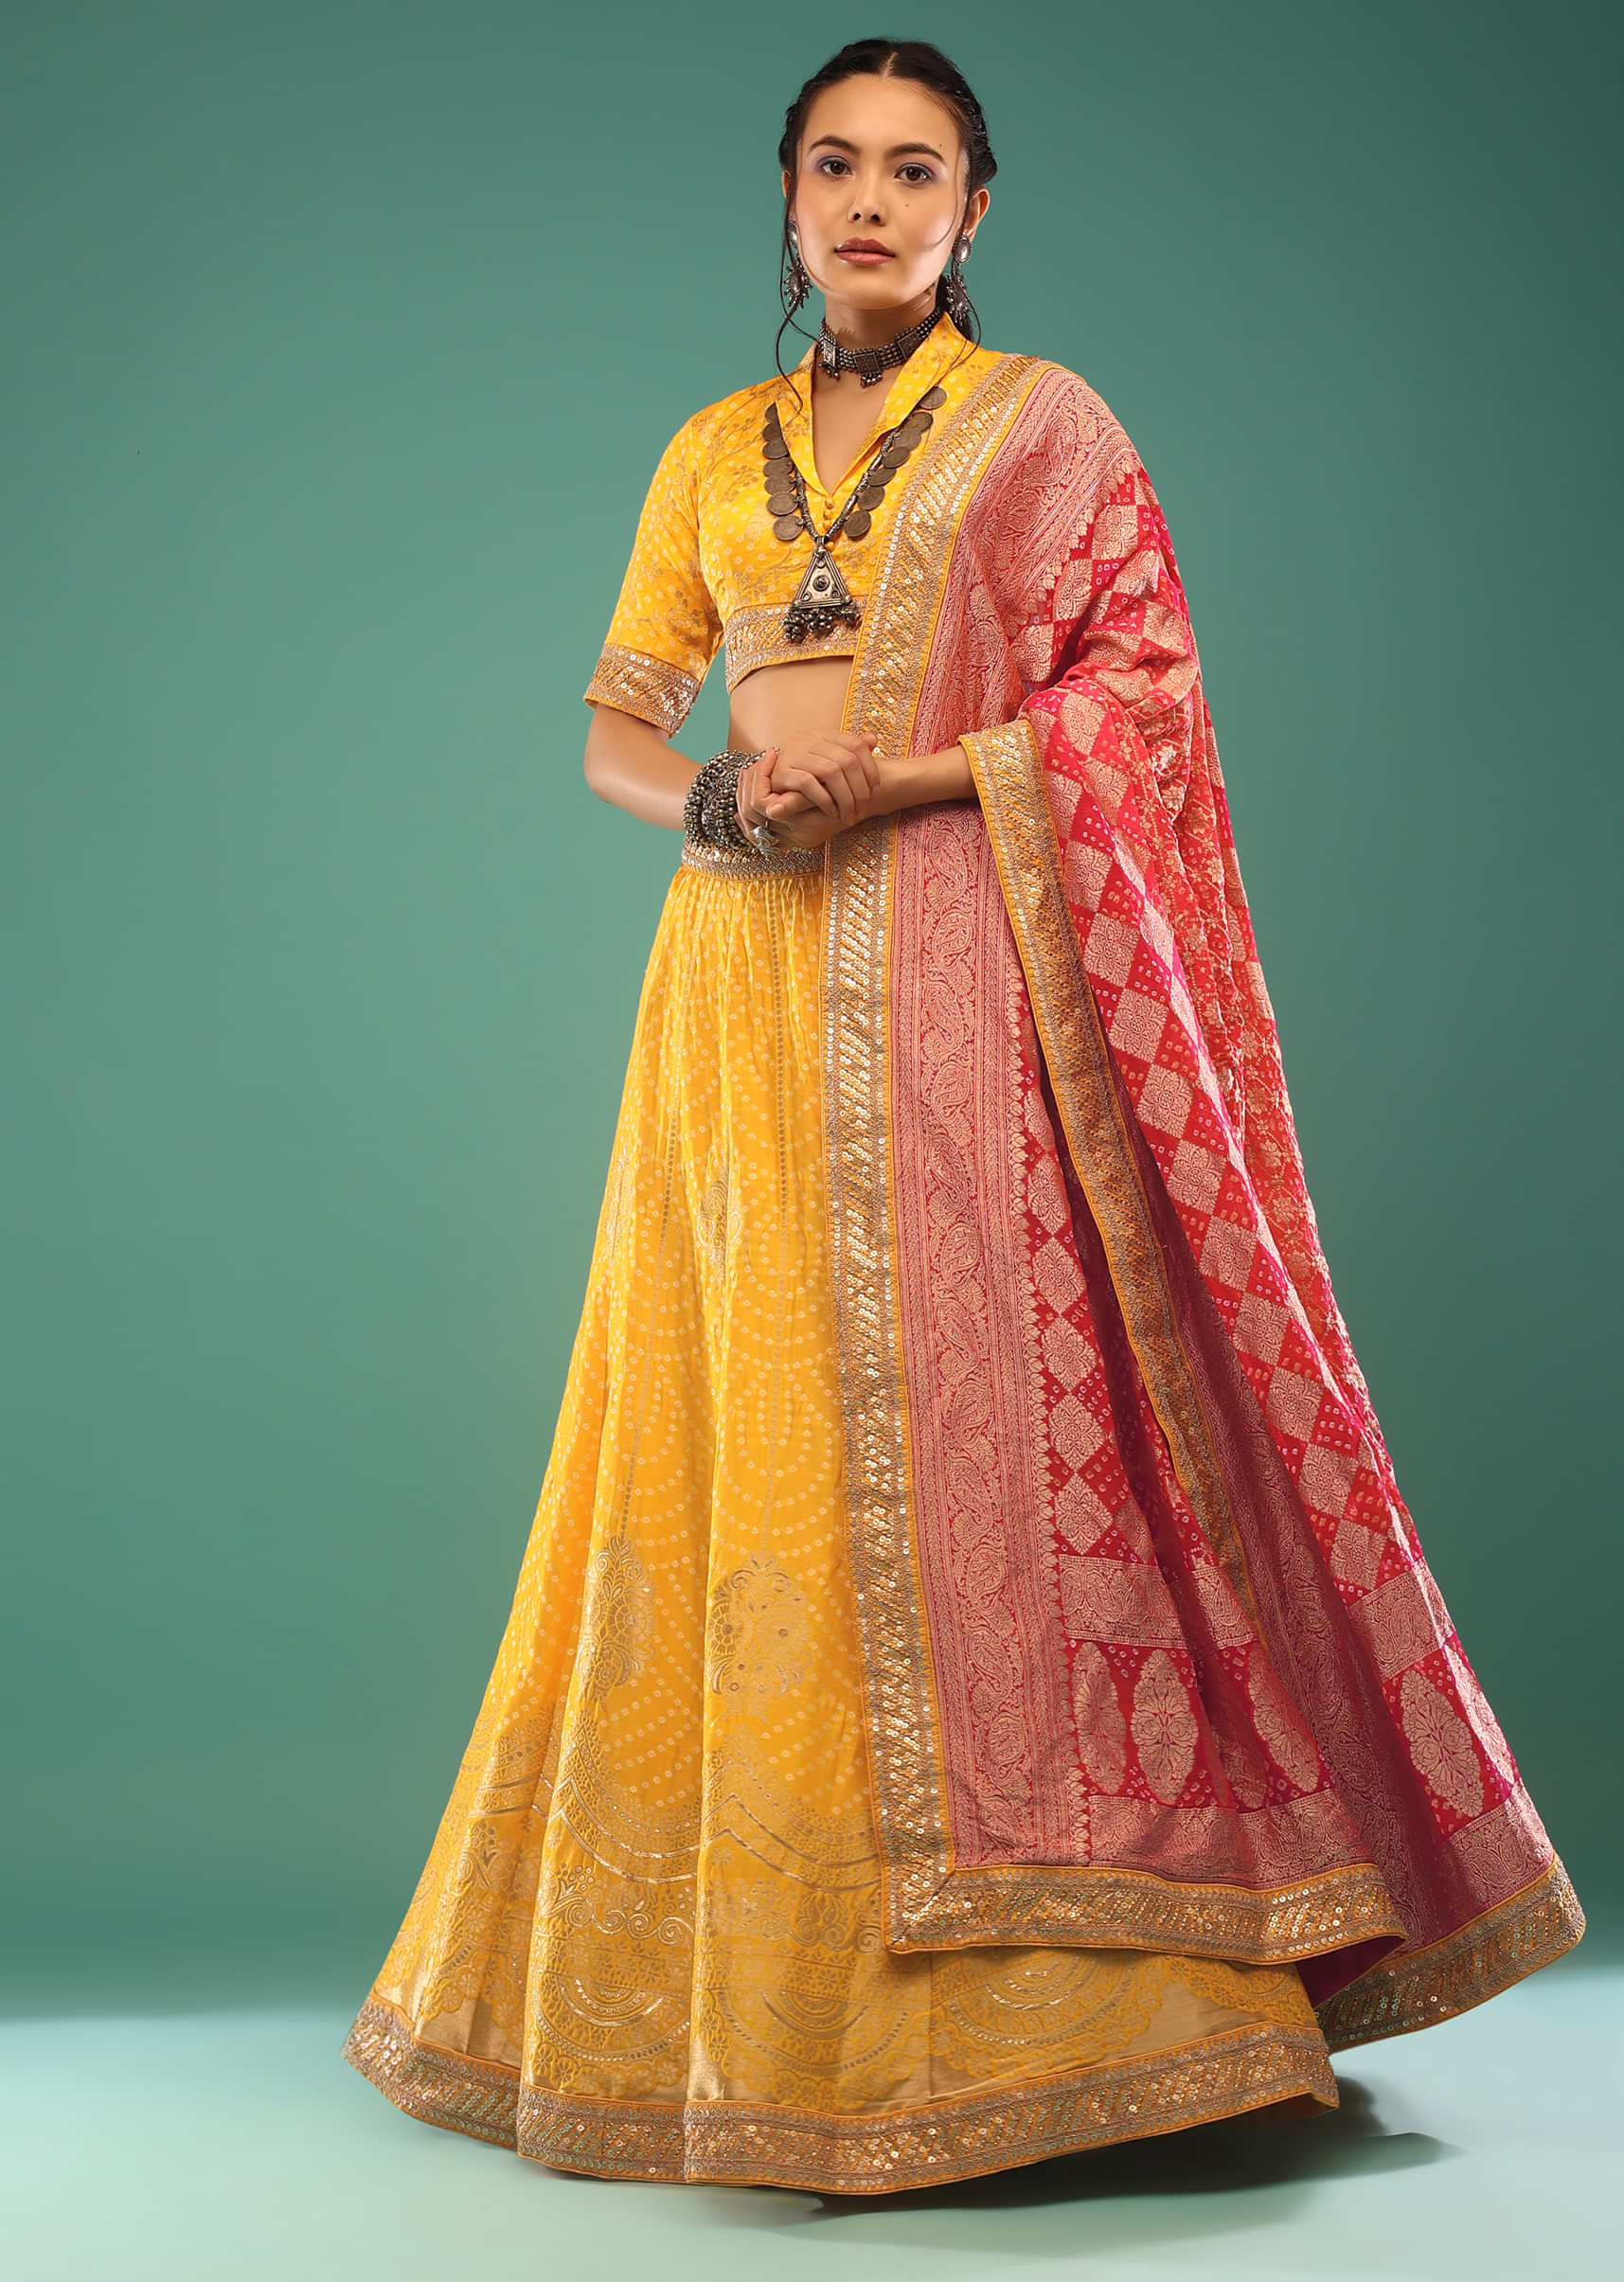 Spectra Yellow Lehenga In Brocade Silk Woven In Bandhani Design, Paired With The Choli And Dupatta With The Sequins,Zari Embroidery